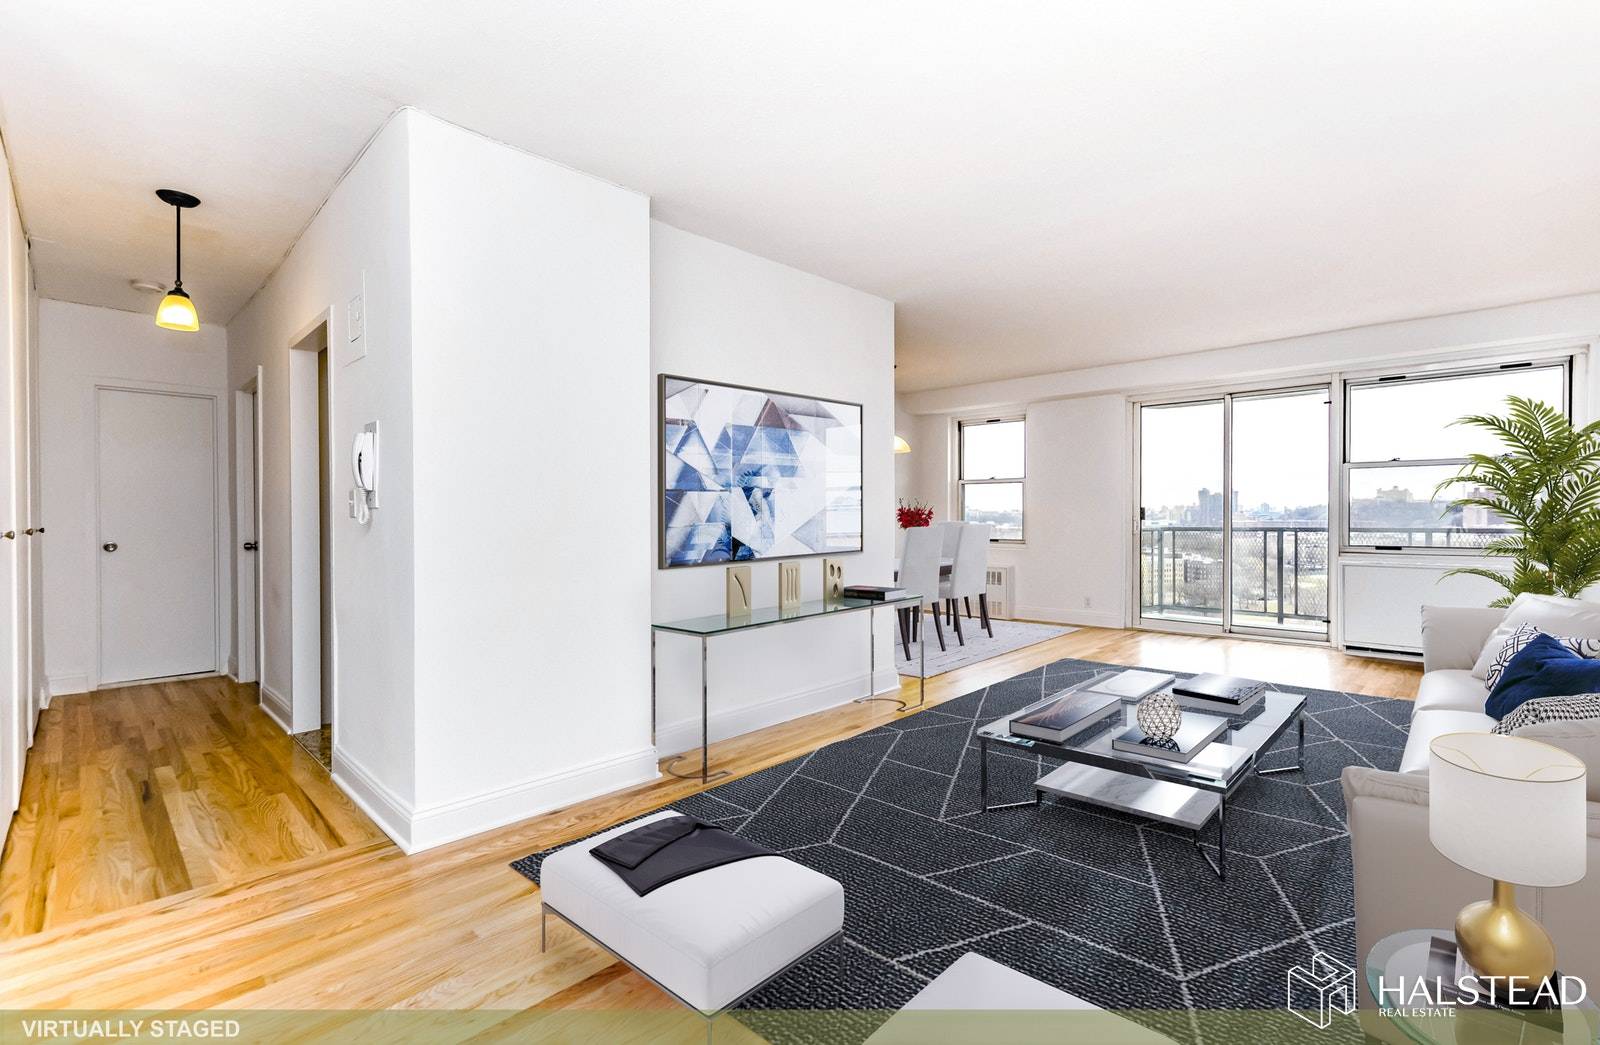 No Board Approval needed for this completely renovated one bedroom with terrace at the sought after Blue Building.